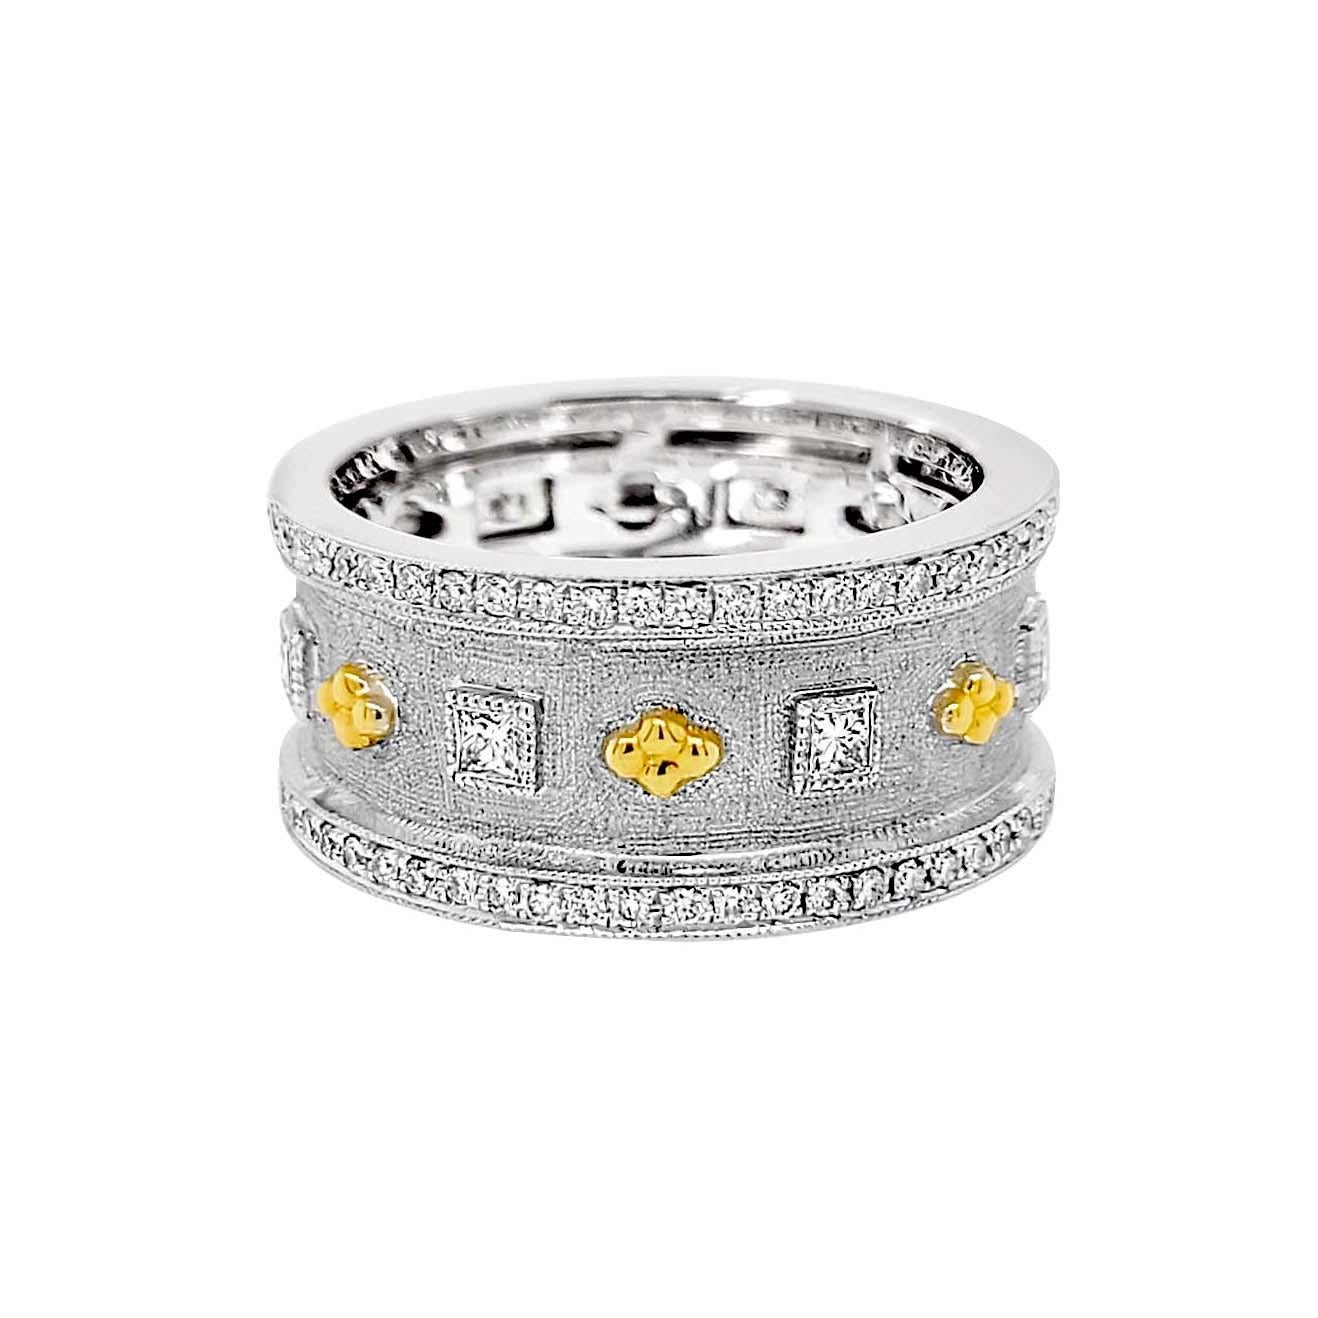 Produced by award winning Italian designer Stefano Vitolo. Stefano creates custom artisanal one of a kind jewelry with excellent gemstones in a truly old world Italian craftmanship.
This handcrafted ring has 0.74 total carat weight of F/G color and